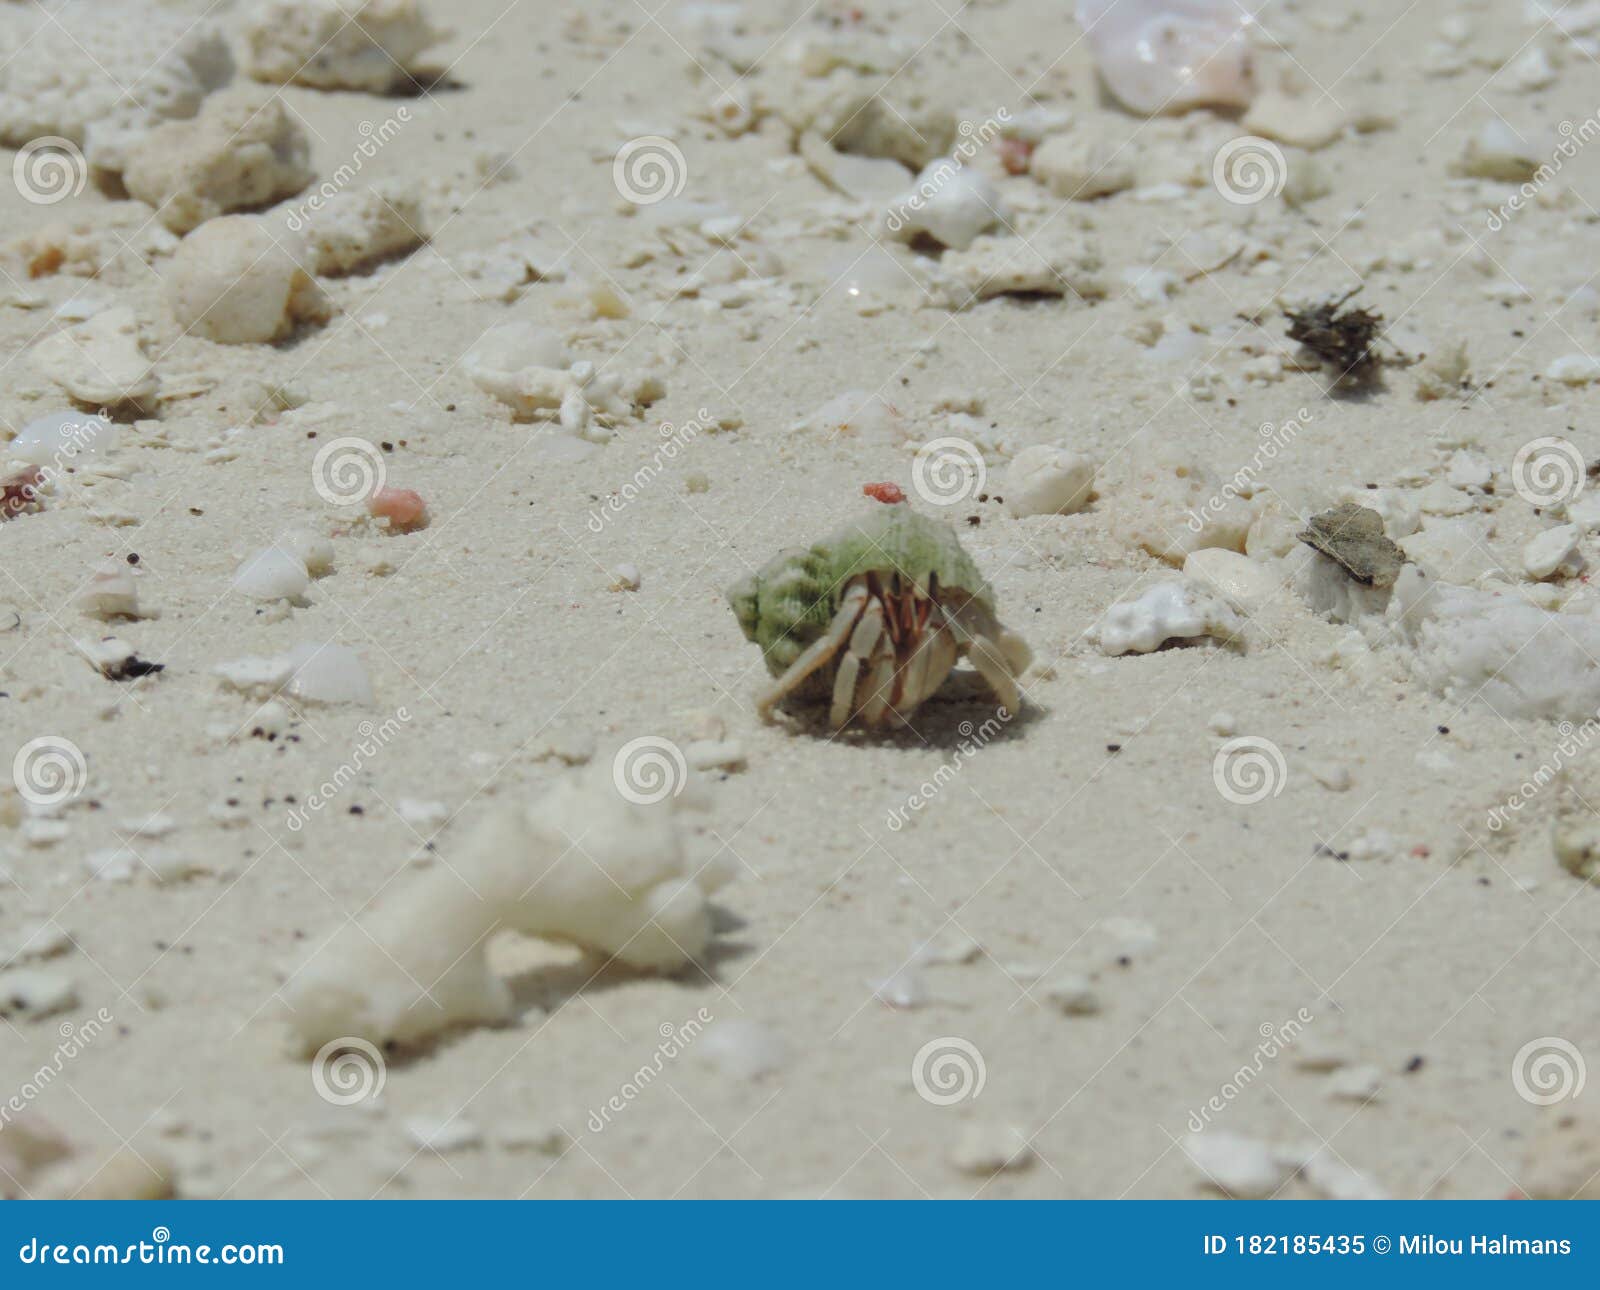 Hermit Crab/ Soldier Crab in Shell Walks on White Beach in Sand Close-up.  Little Wild Sea Animal. Sea Creature Close-up. Maldives Stock Image - Image  of environment, color: 182185435